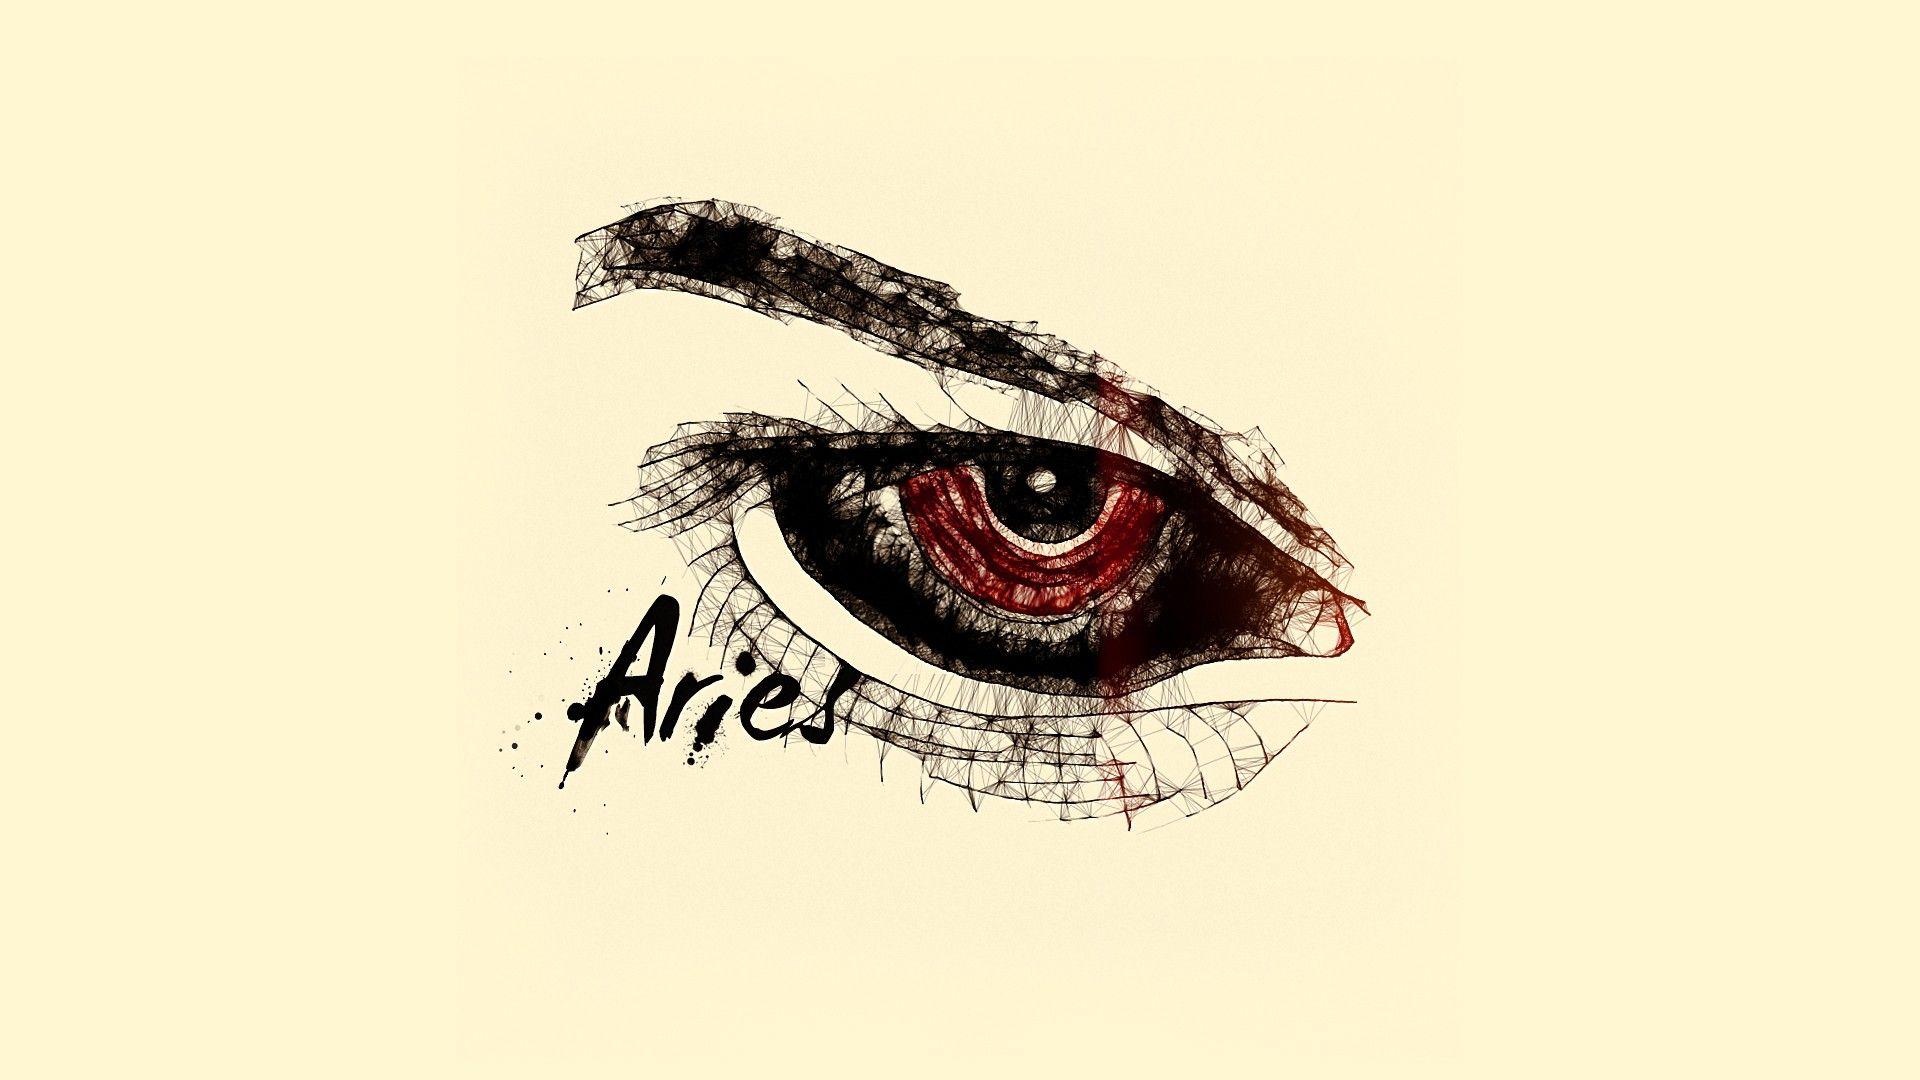 Wallpaper.wiki Red Eyes Aries Background 1920x1080 PIC WPC0011612